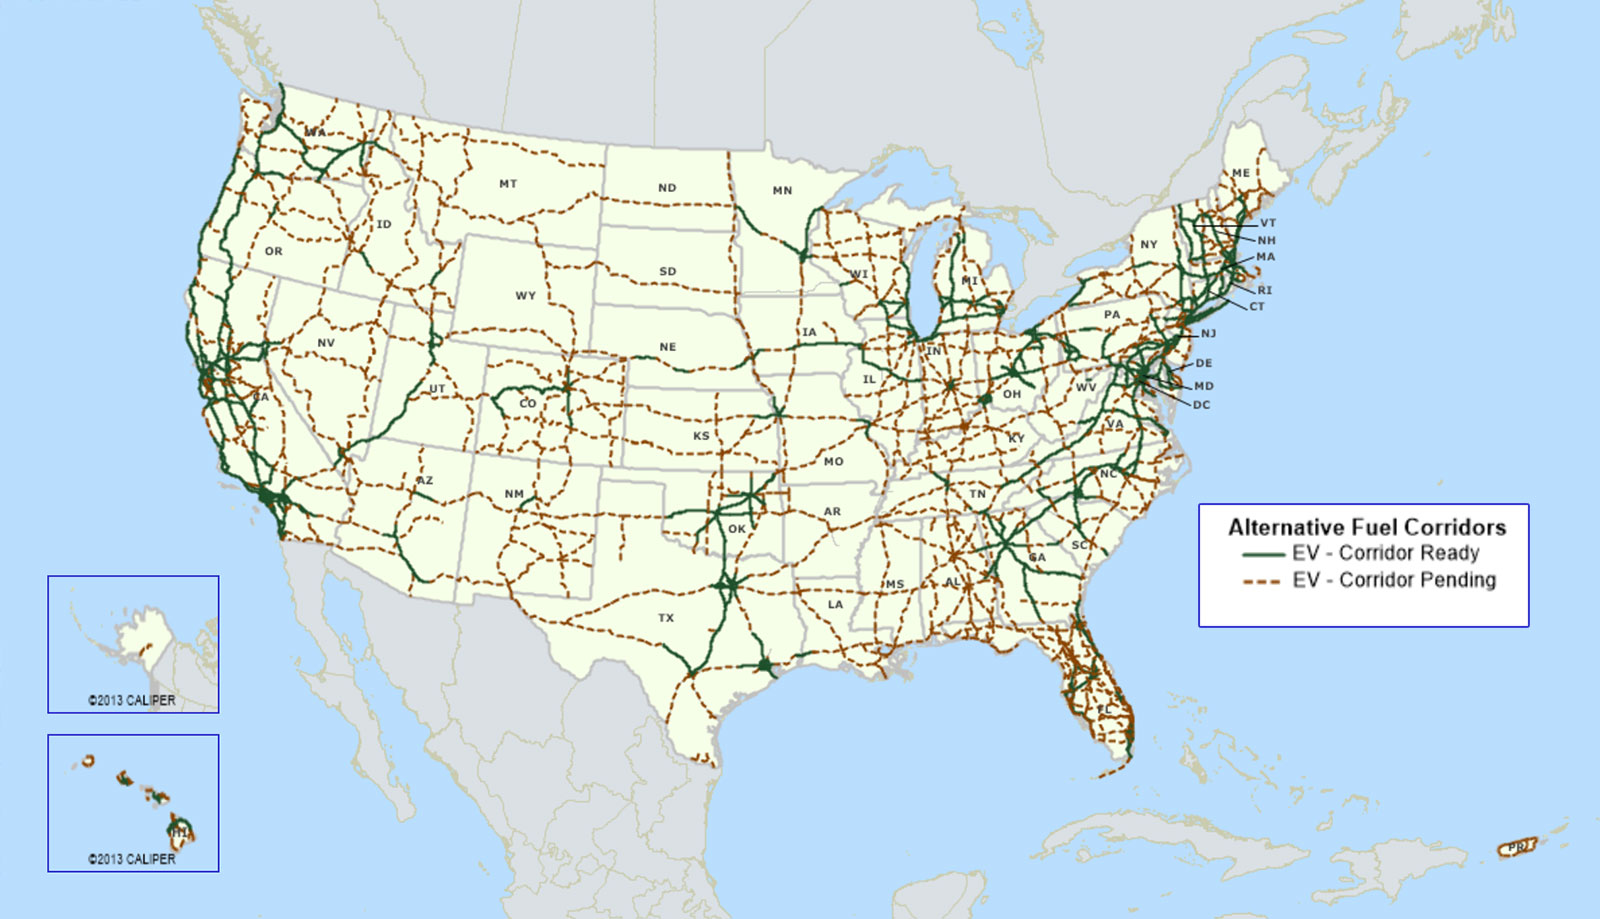 Map showing alternative / electric vehicle corridors in the United States and Puerto Rico